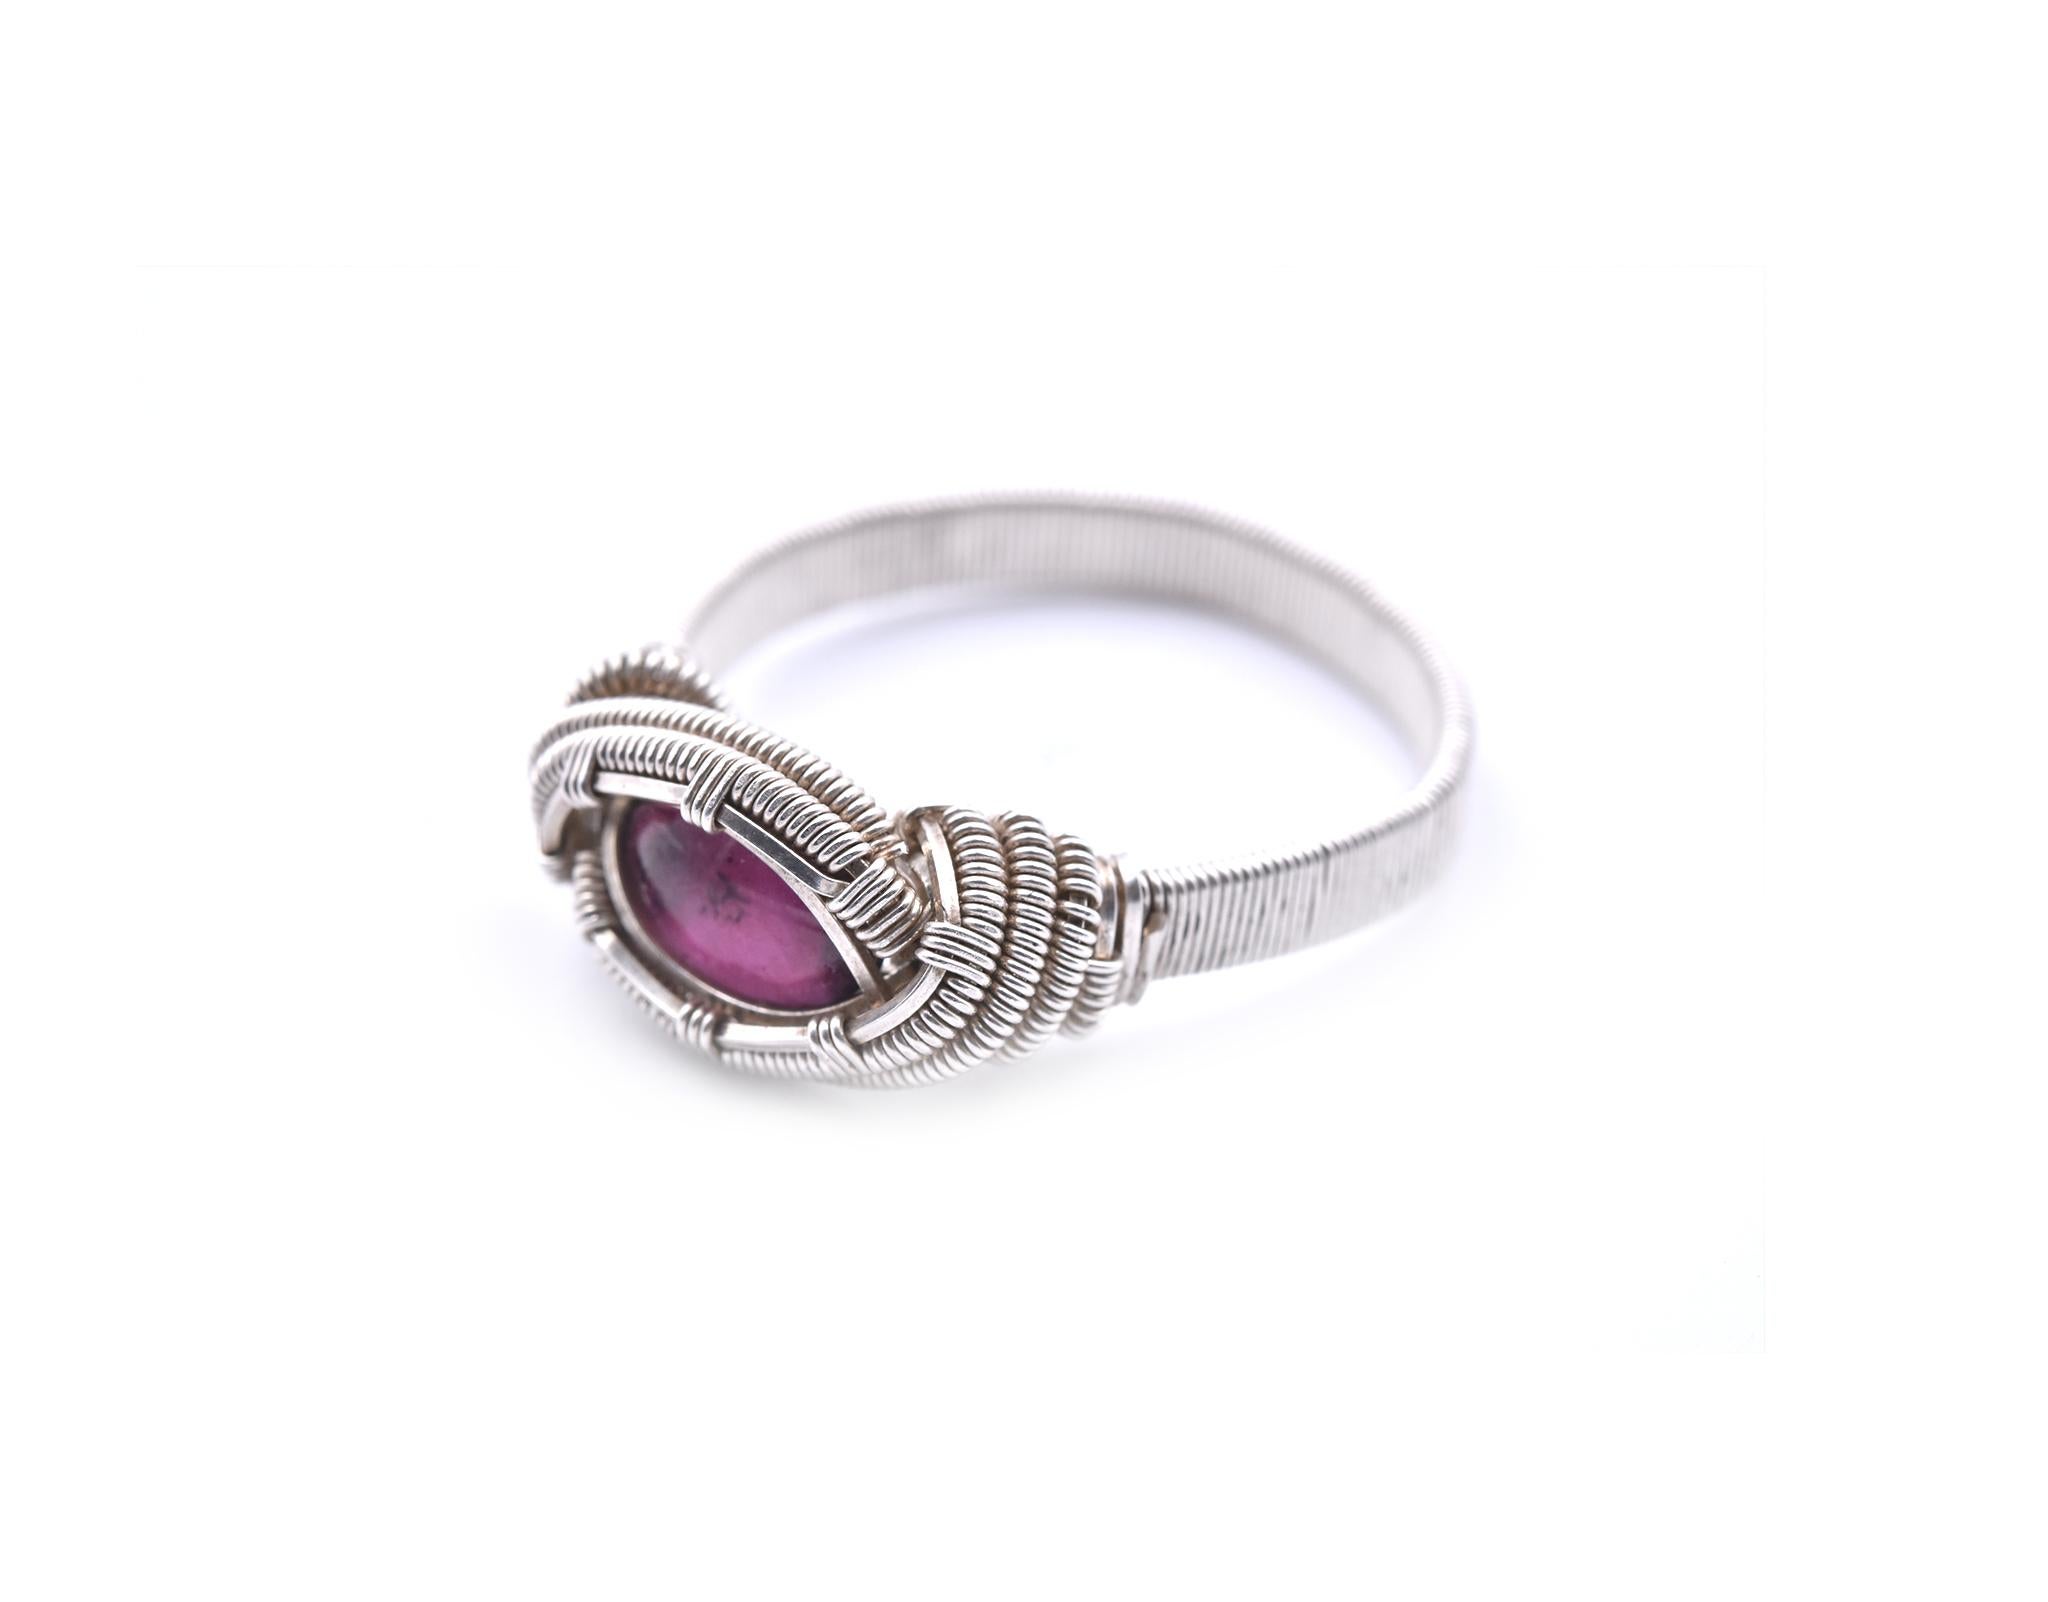 Designer: custom design
Material: sterling silver
Size: 10 (please allow two additional shipping days for sizing requests)
Dimensions: ring top is 17.40mm by 9.00mm 
Weight: 4.27 grams
